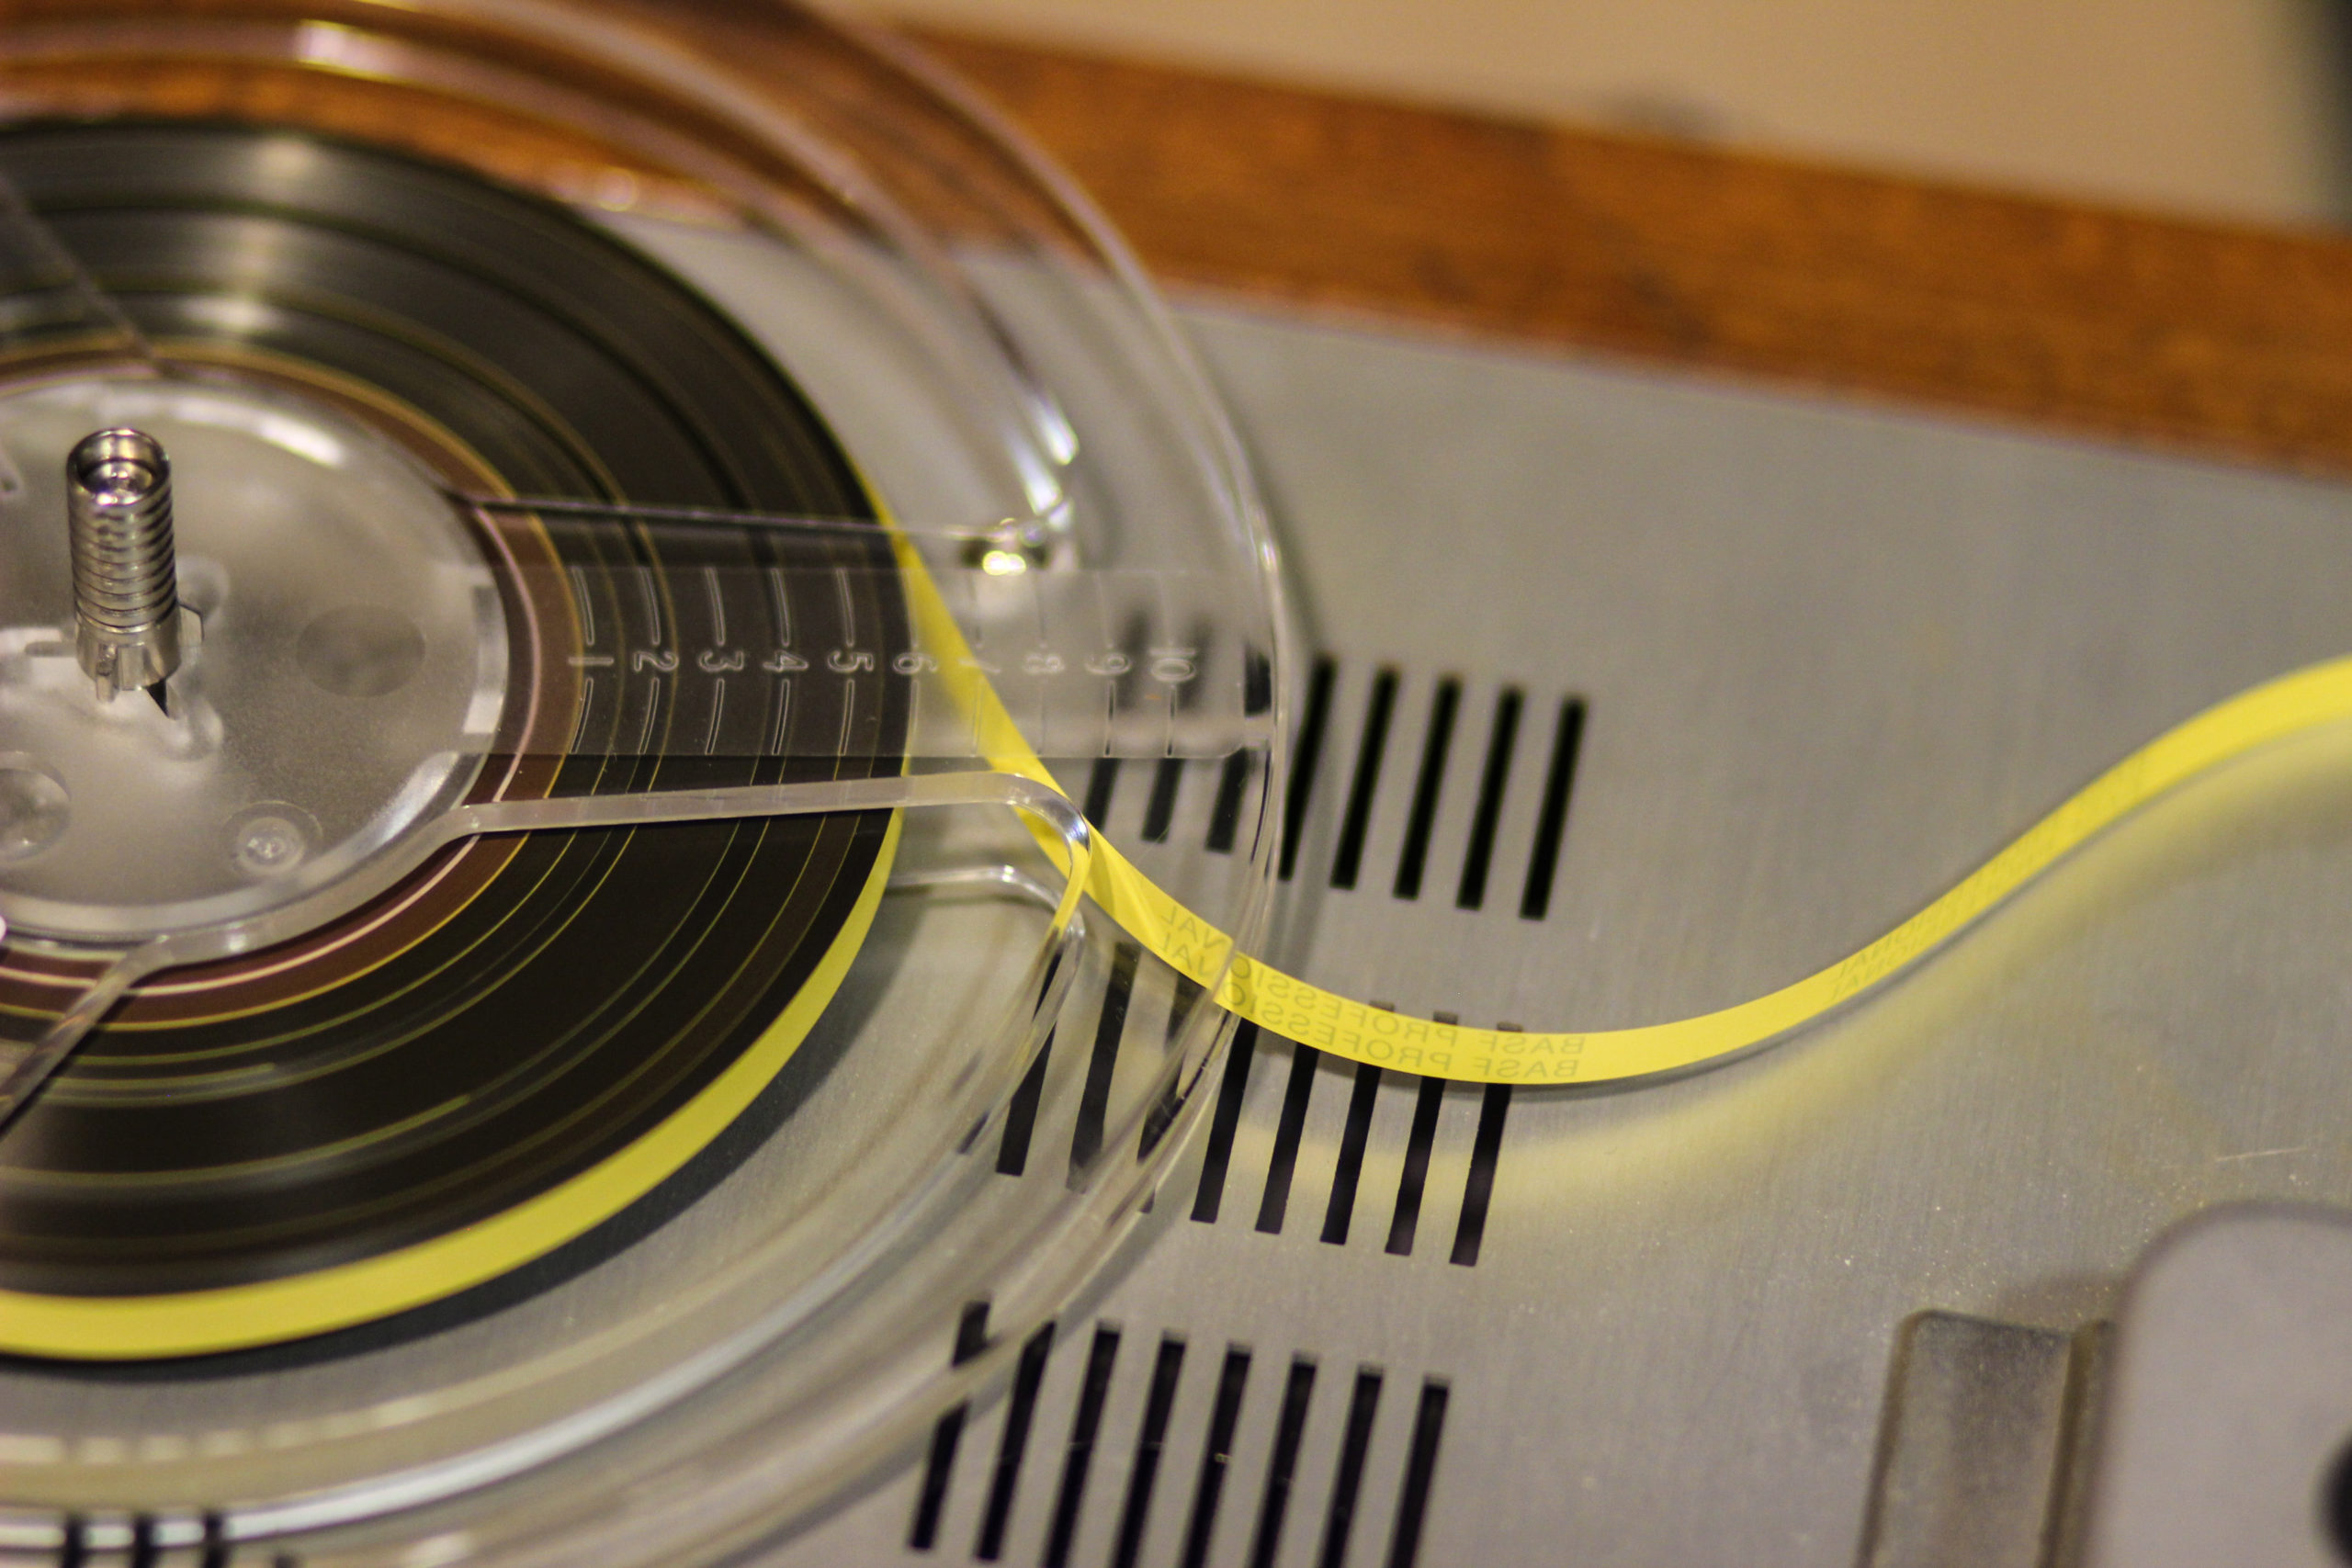 Photo of an open reel tape with tape, with tape spooling off to the right hand side, laying on the surface of a tape player.